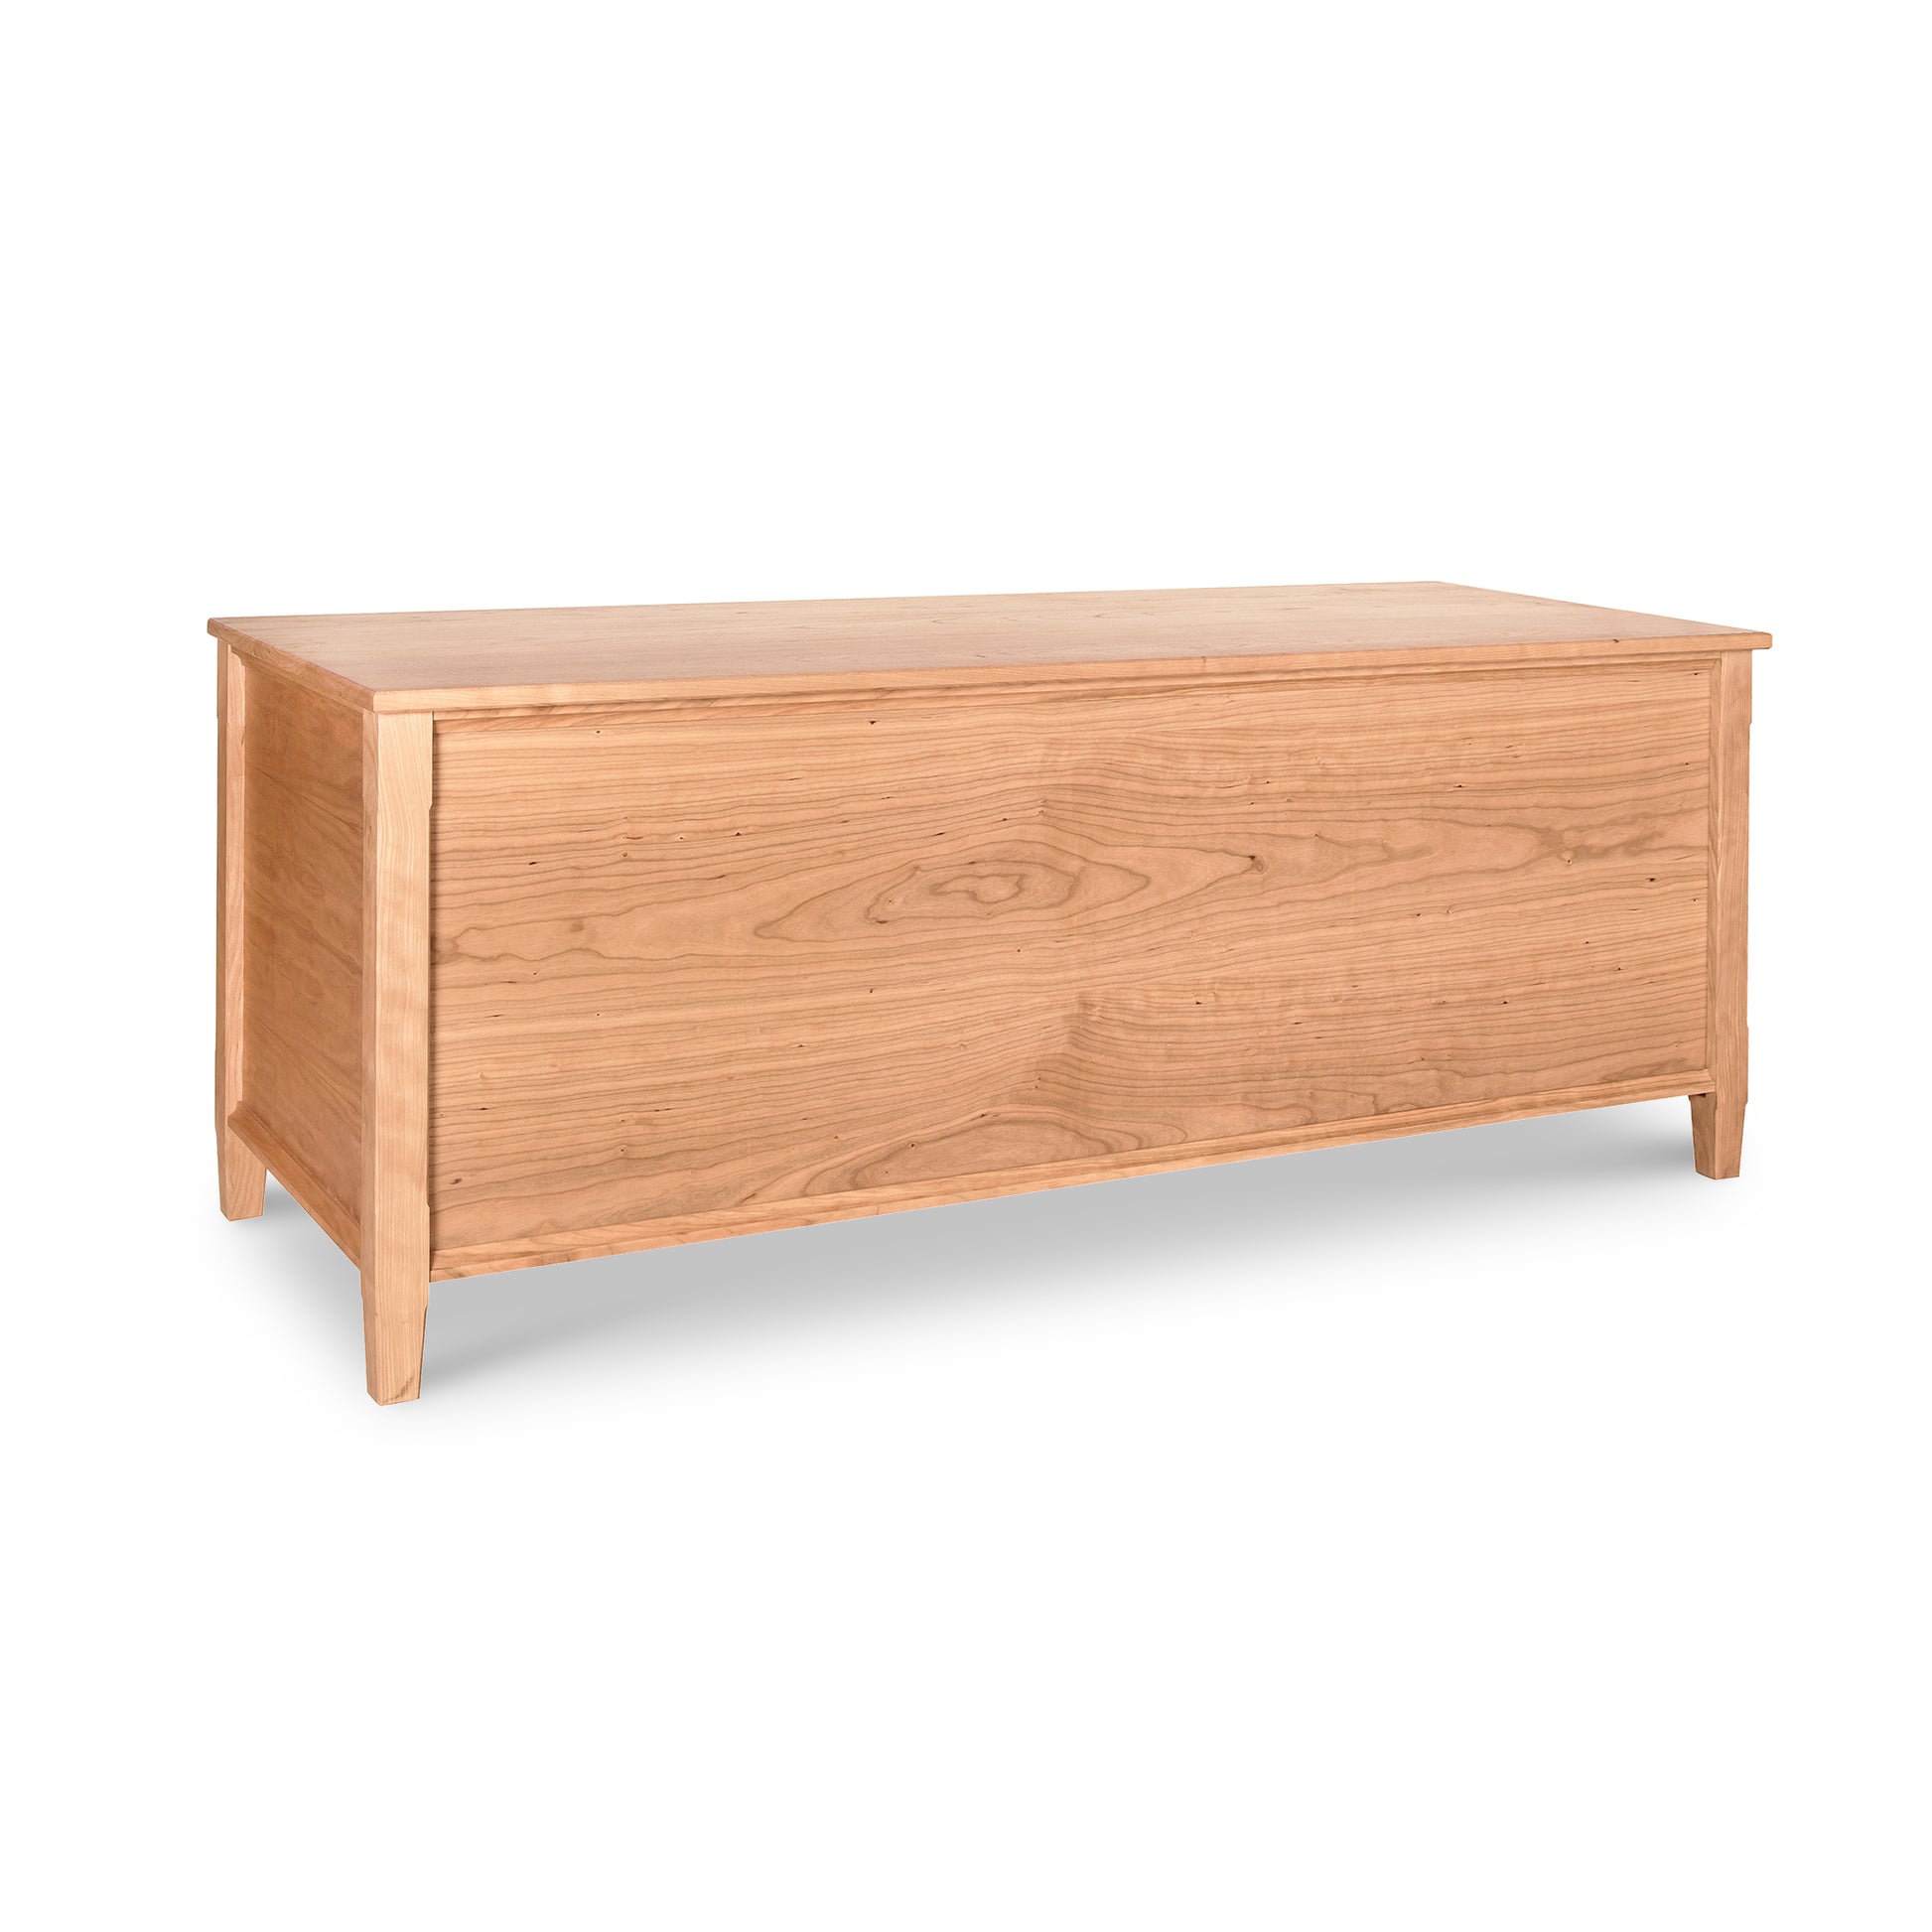 A Vermont Shaker Blanket Chest by Maple Corner Woodworks with a smooth finish and simple, clean lines, positioned against a white background. This eco-friendly chest features a hinged lid and slightly tapered legs.